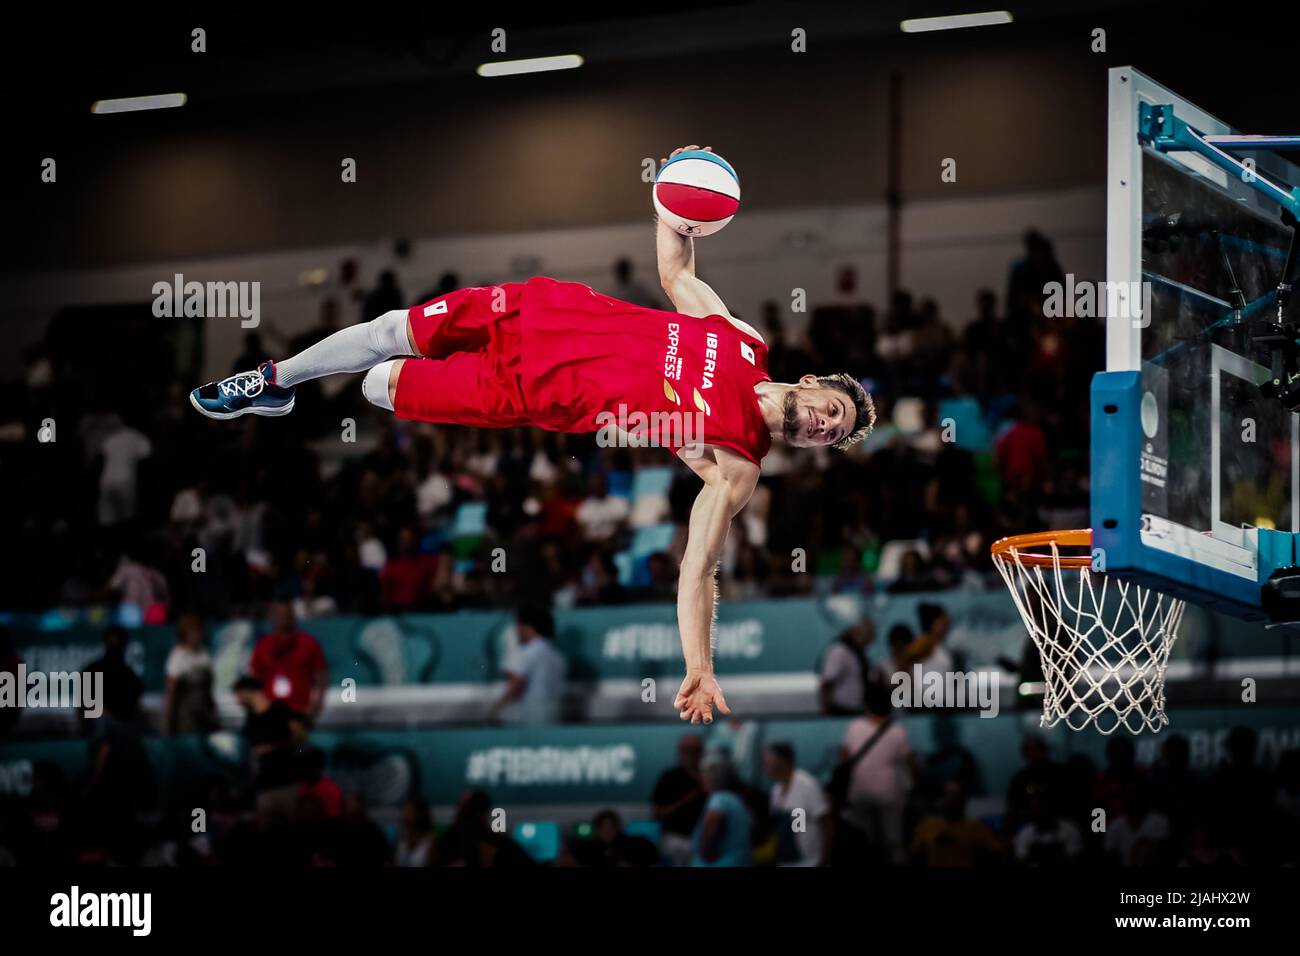 Tenerife, Spain, September 23, 2018:Acrobatic slam dunk of a male basketball player during a basketball show at the FIBA Basketball WWC Stock Photo